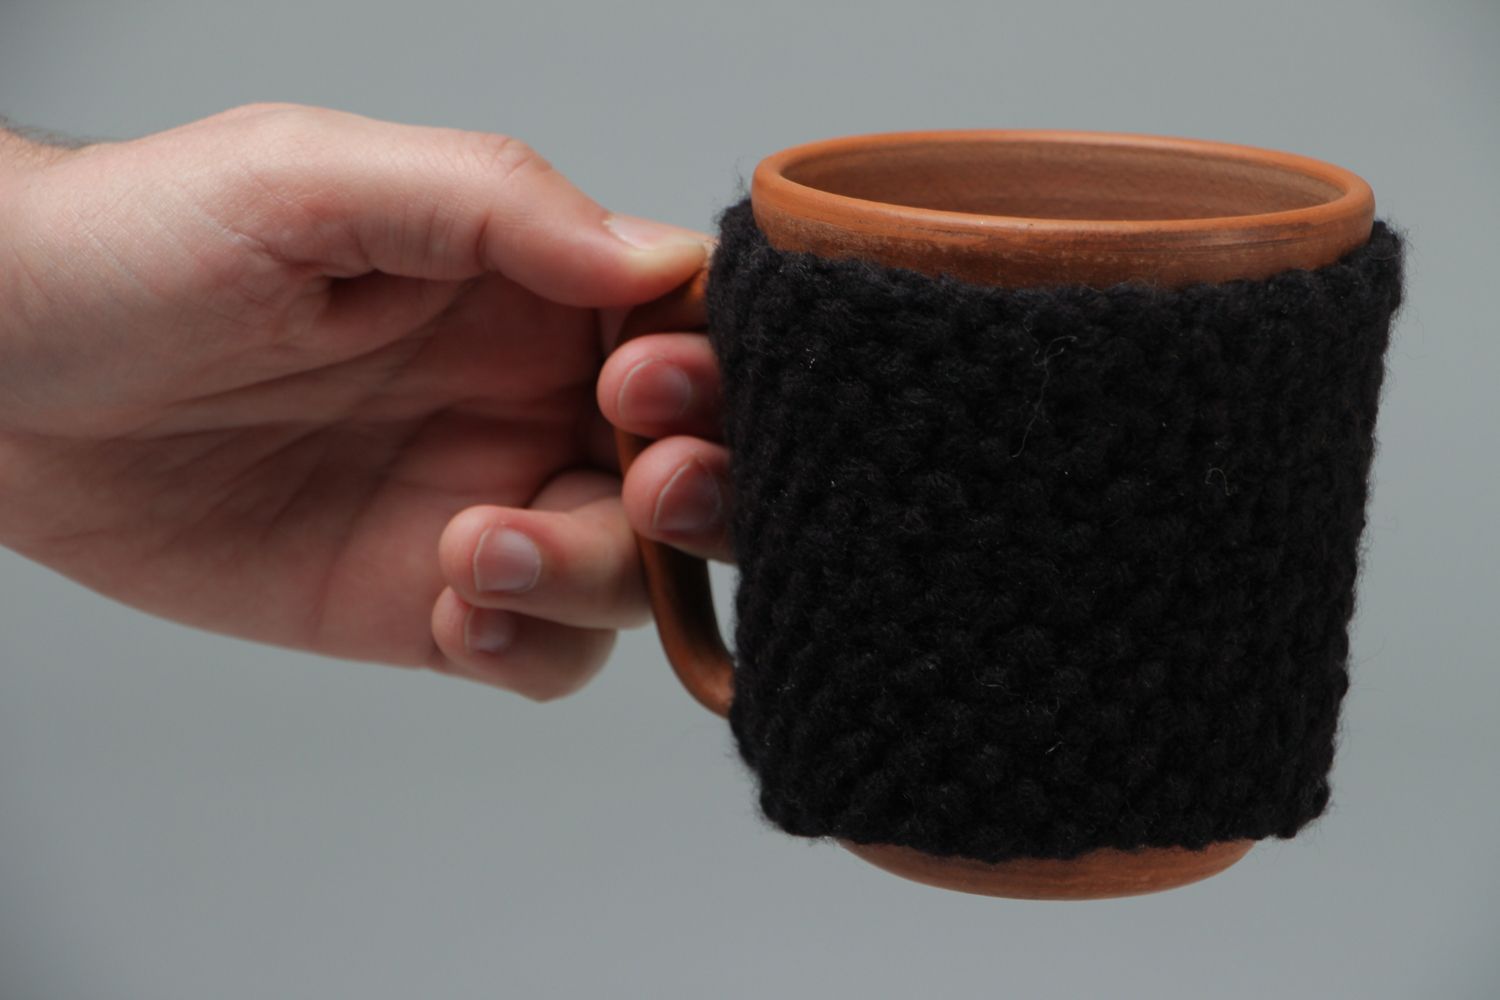 10 oz clay terracotta color cup with handle and black knitted cover photo 4